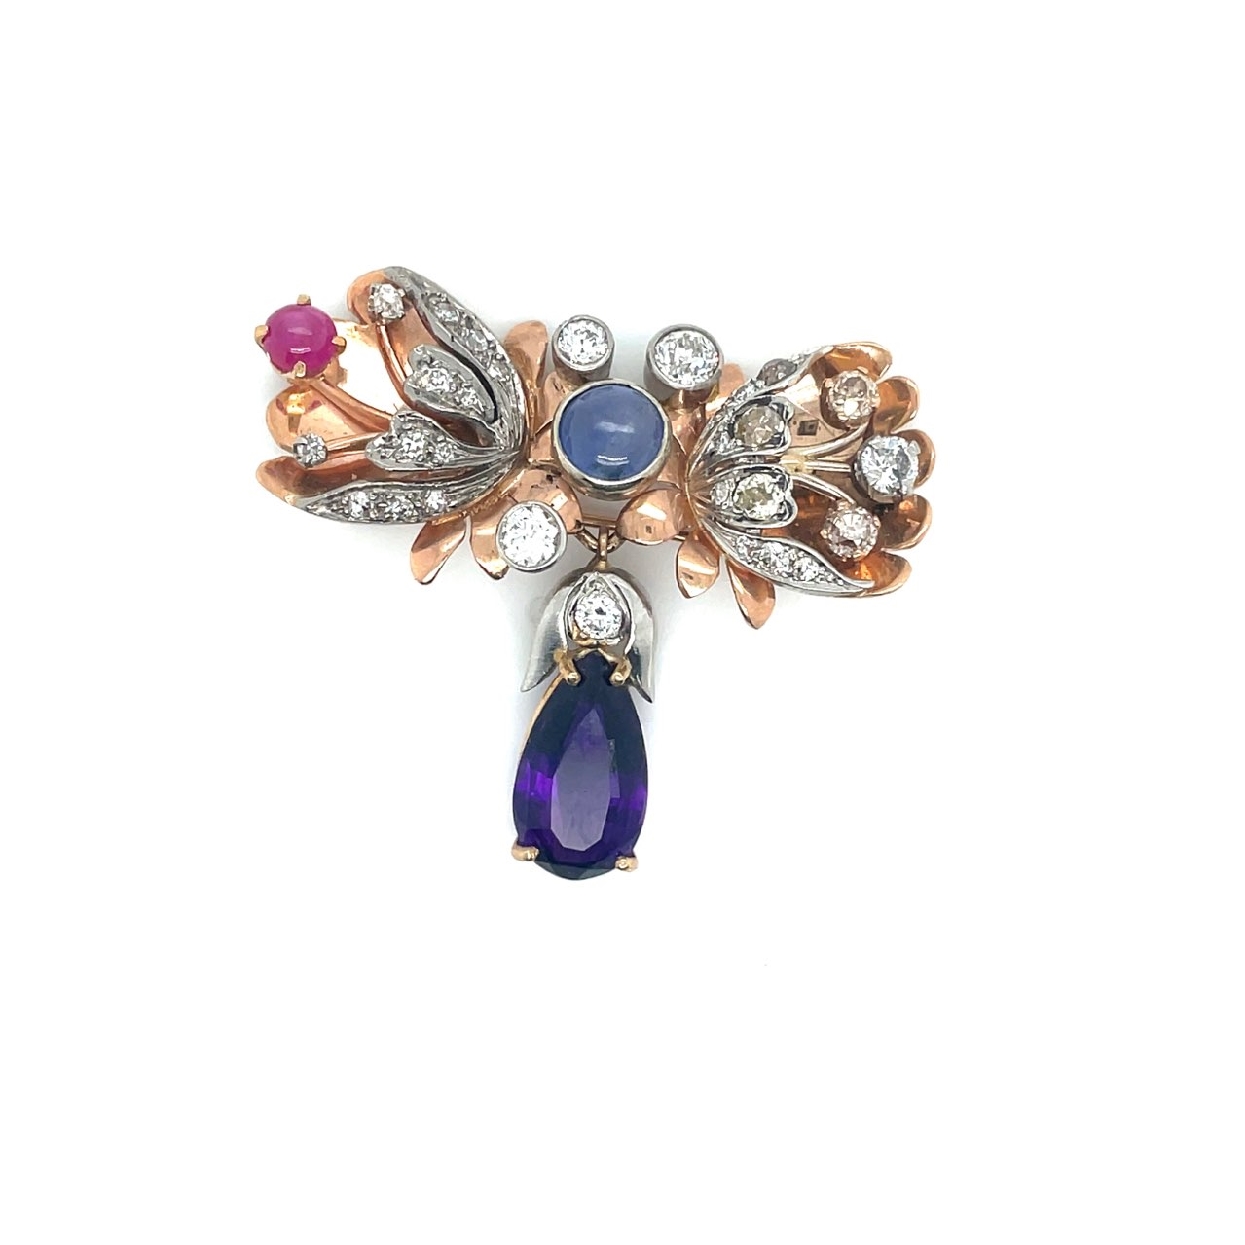 1940s Gold Broach with Diamonds; Pink and Blue Sapphire; and Amethyst 